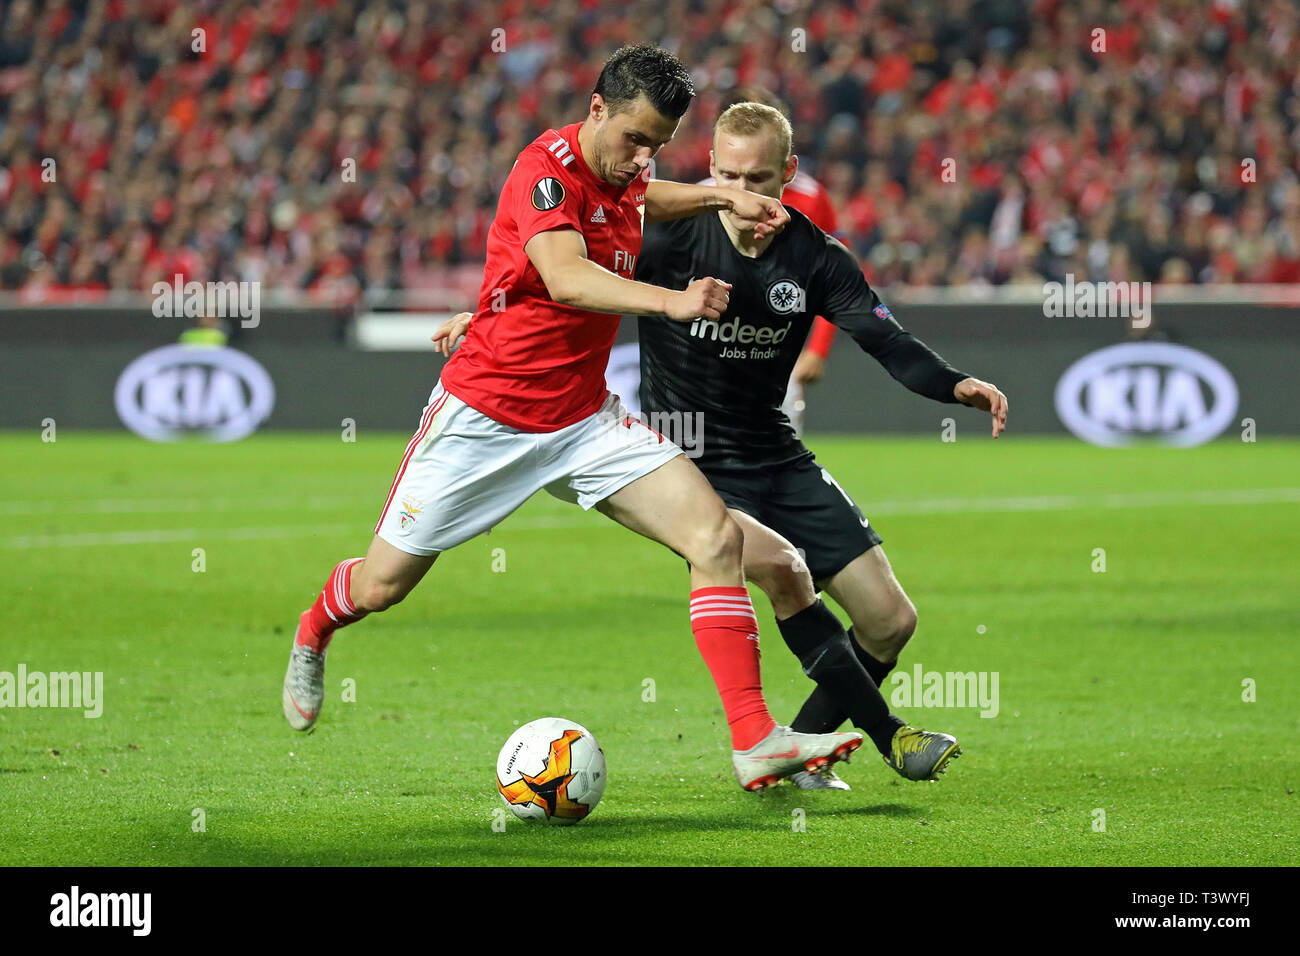 Sébastien Corchia of SL Benfica (L) vies for the ball with Sebastian Rode of Eintracht Frankfurt (R) during the UEFA Europa League 2018/2019 football match between SL Benfica vs Eintracht Frankfurt.  (Final score: SL Benfica 4 - 2 Eintracht Frankfurt) Stock Photo